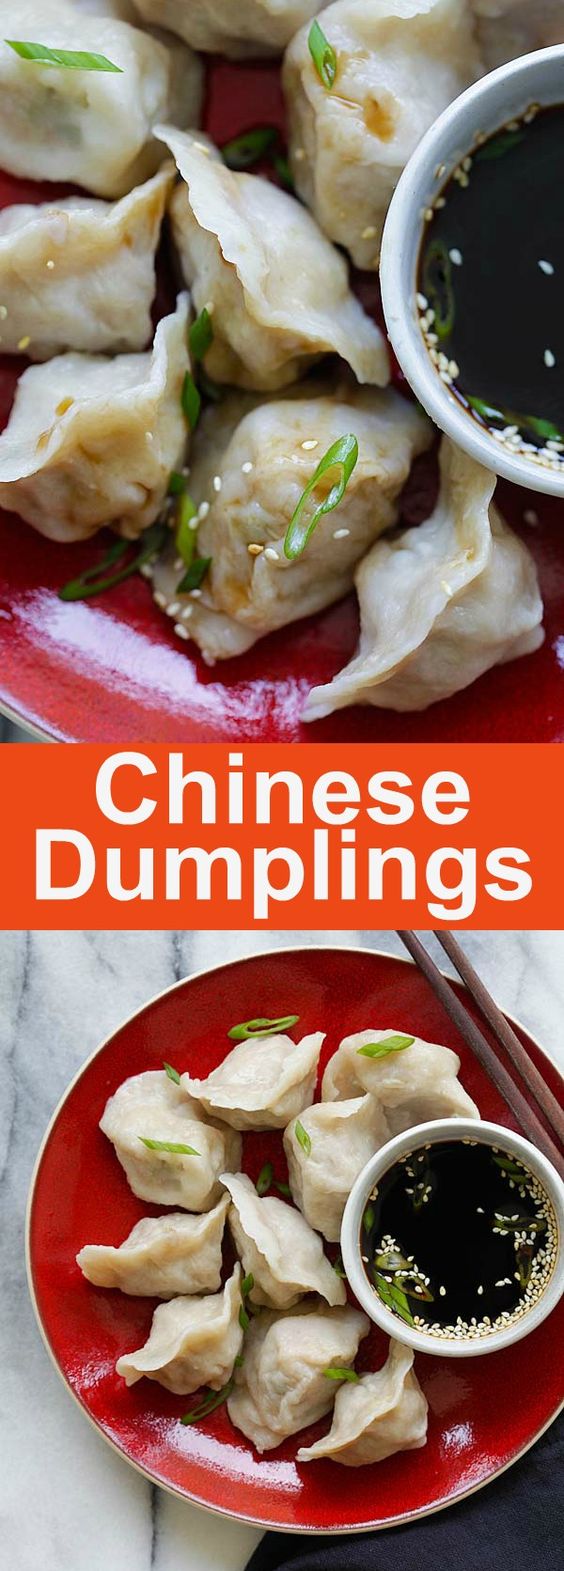 Pork and Chive Dumplings - juicy and delicious Chinese dumplings filled with ground pork and chives. Homemade jiaozi is the best | rasamalaysia.com